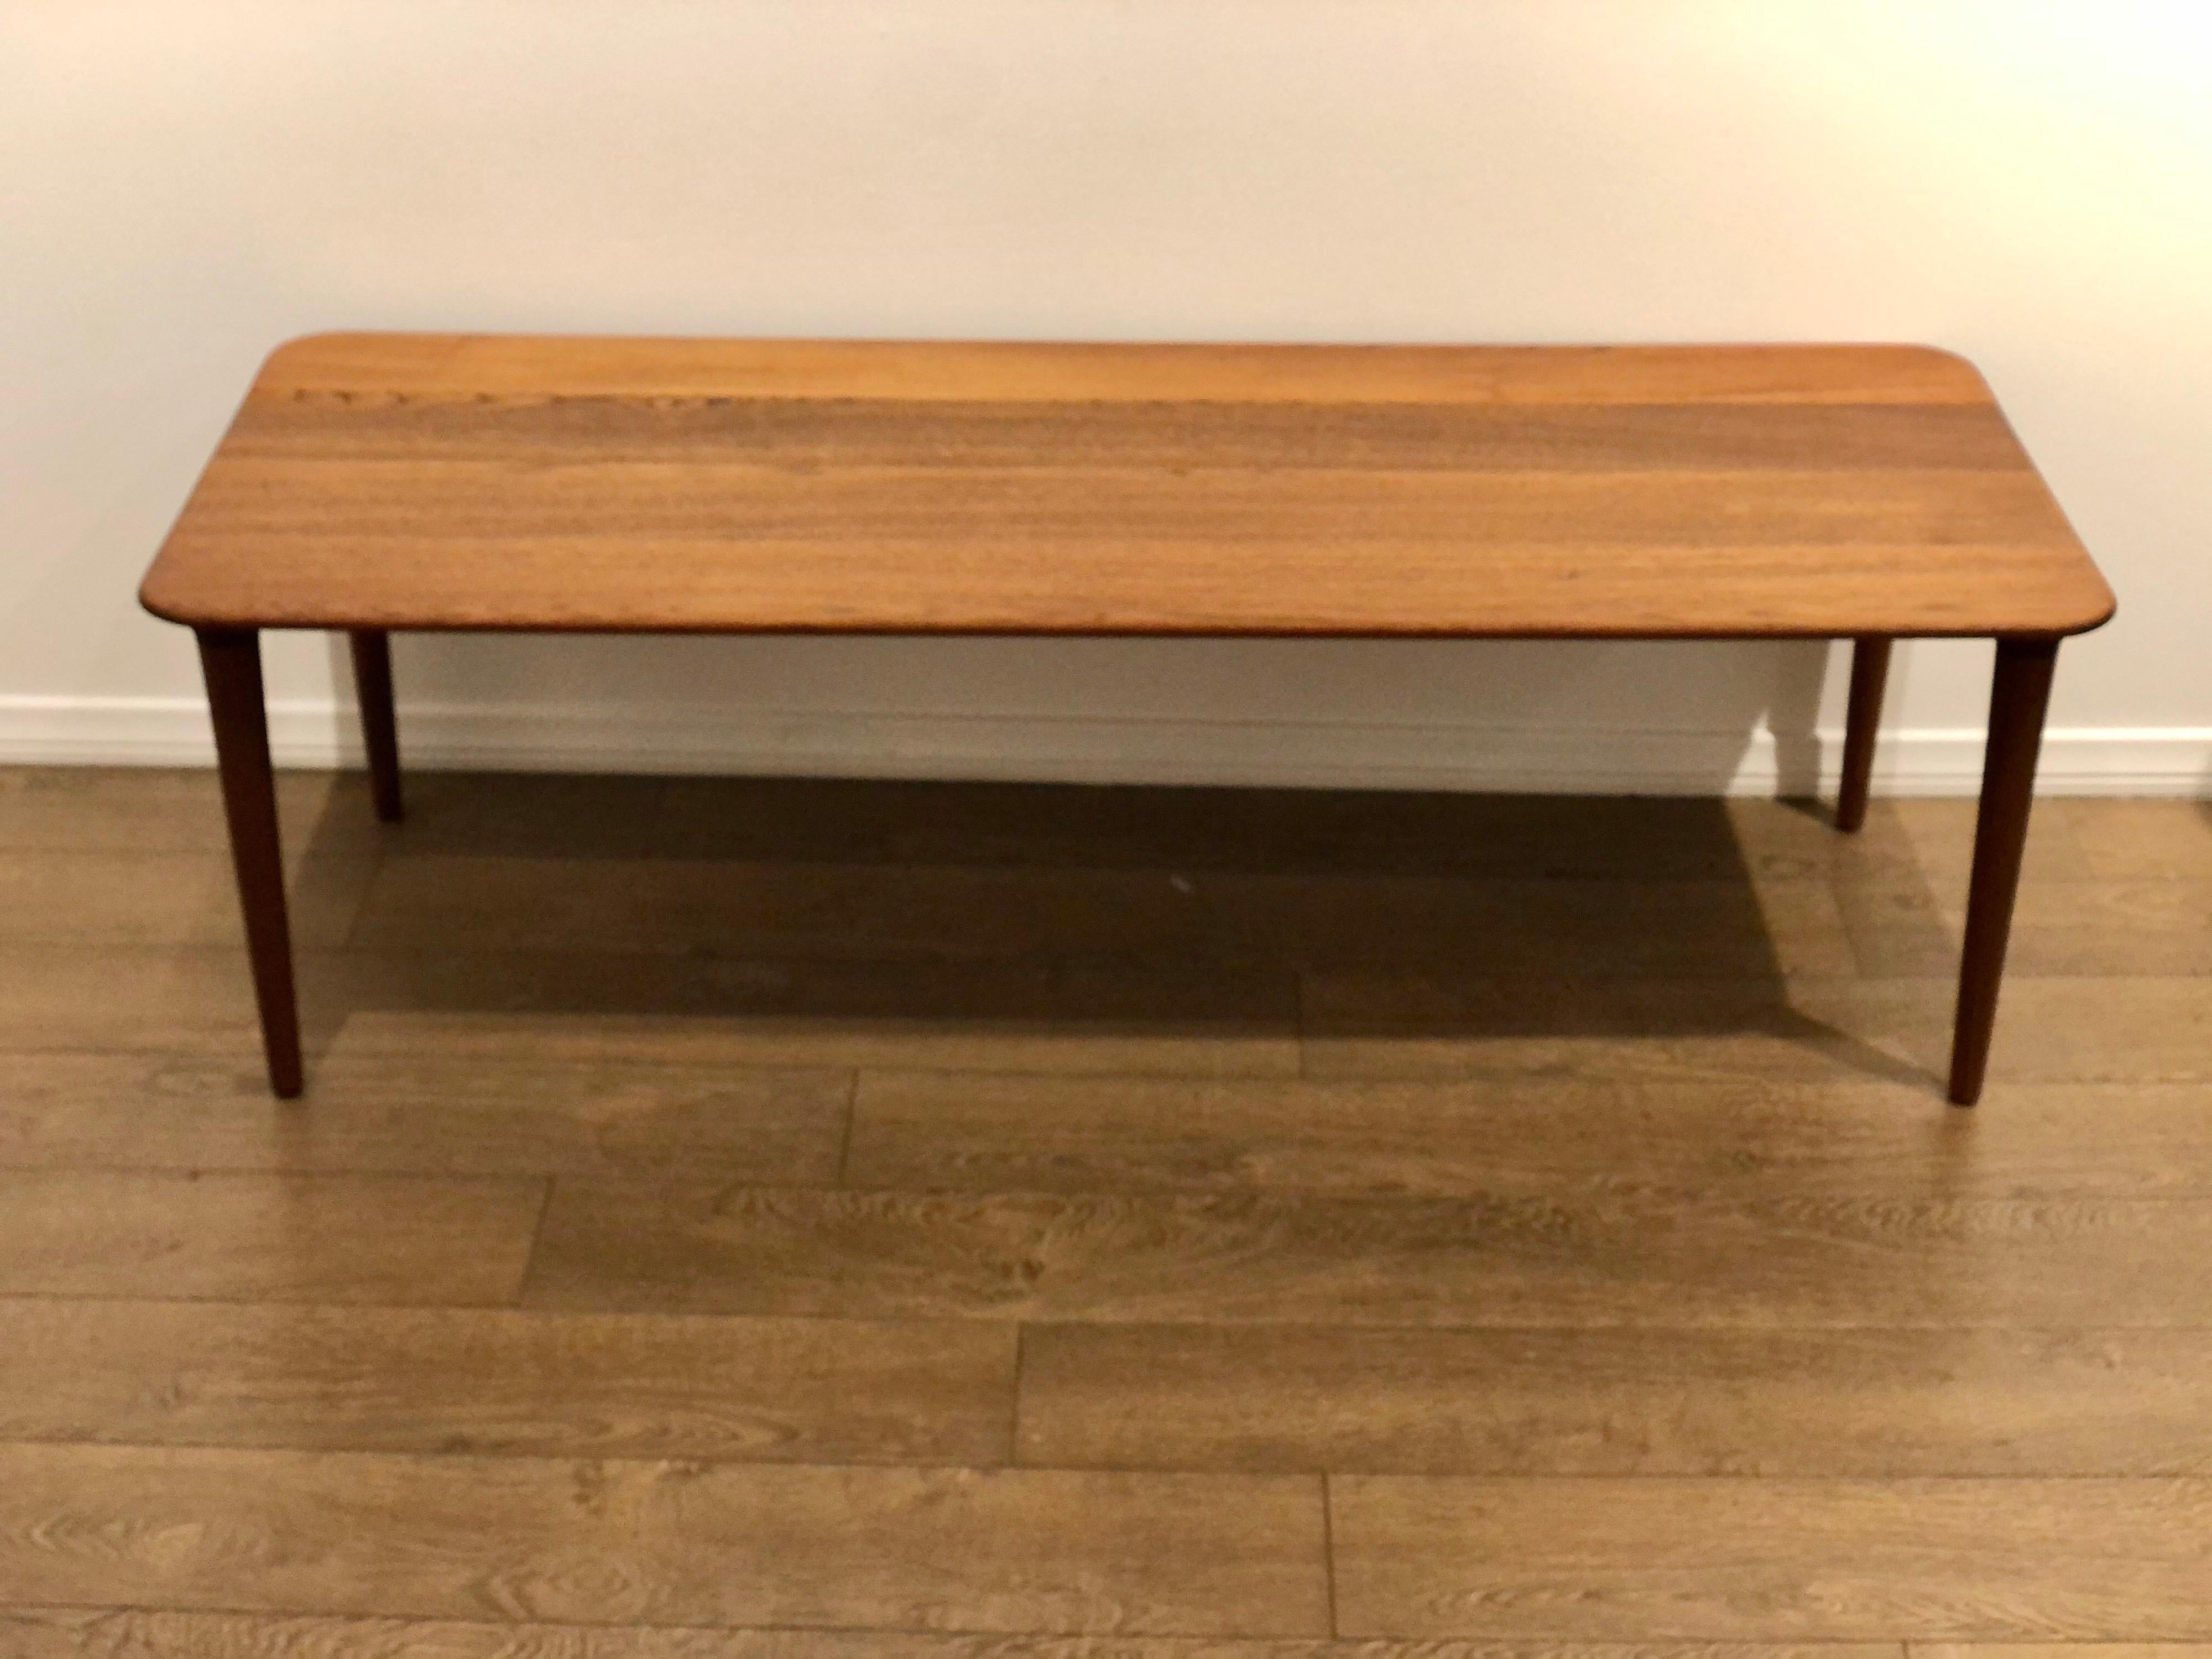 Beautiful solid teak coffee table designed by Rolf Rastad & Adolf Relling for Gustav Bahus, freshly refinished and oiled the legs are spectacular this table its simple and elegant the craftsmanship and quality are unique.